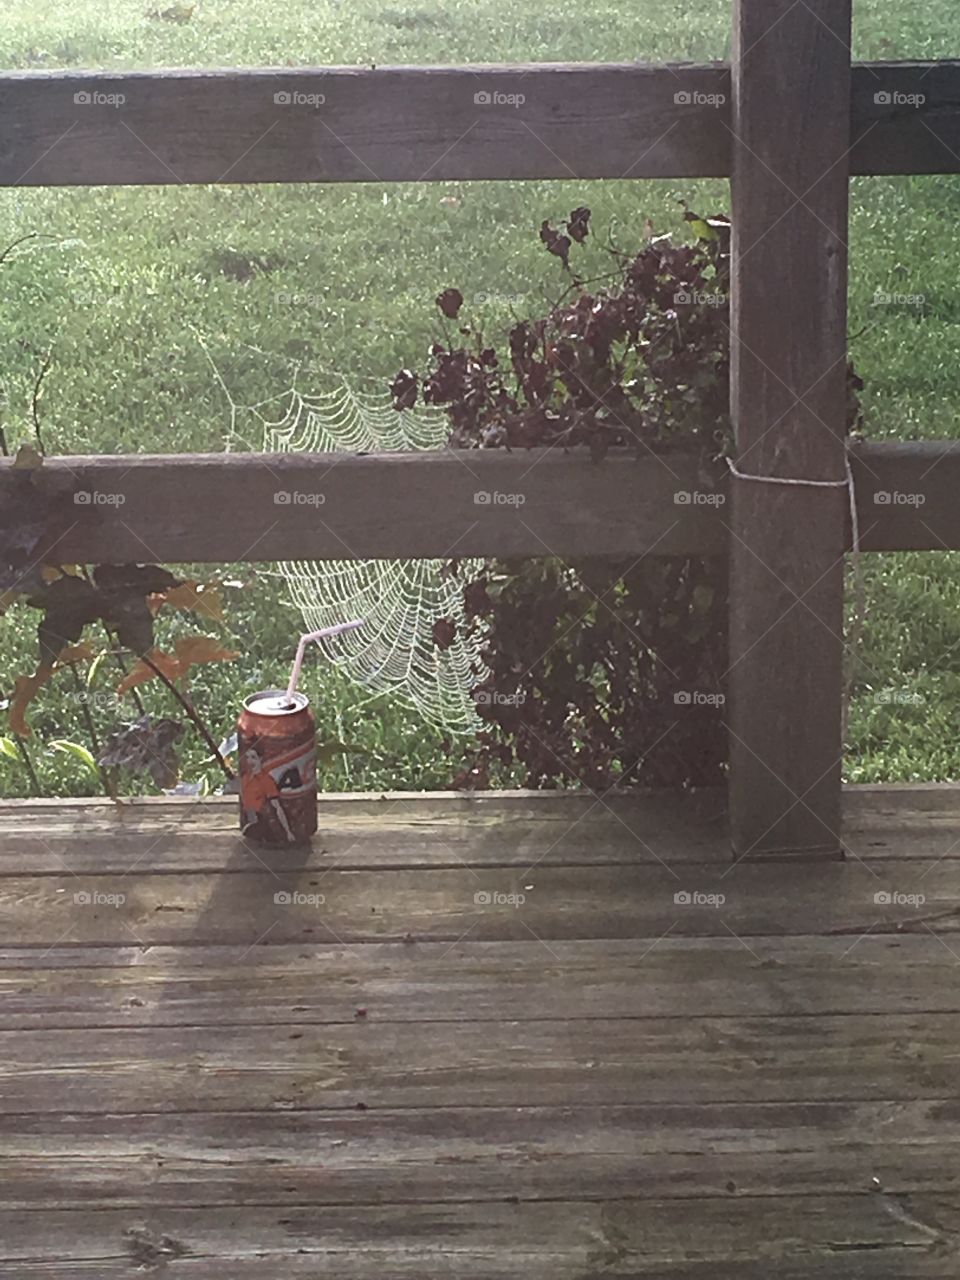 Just a spiderweb and some root beer